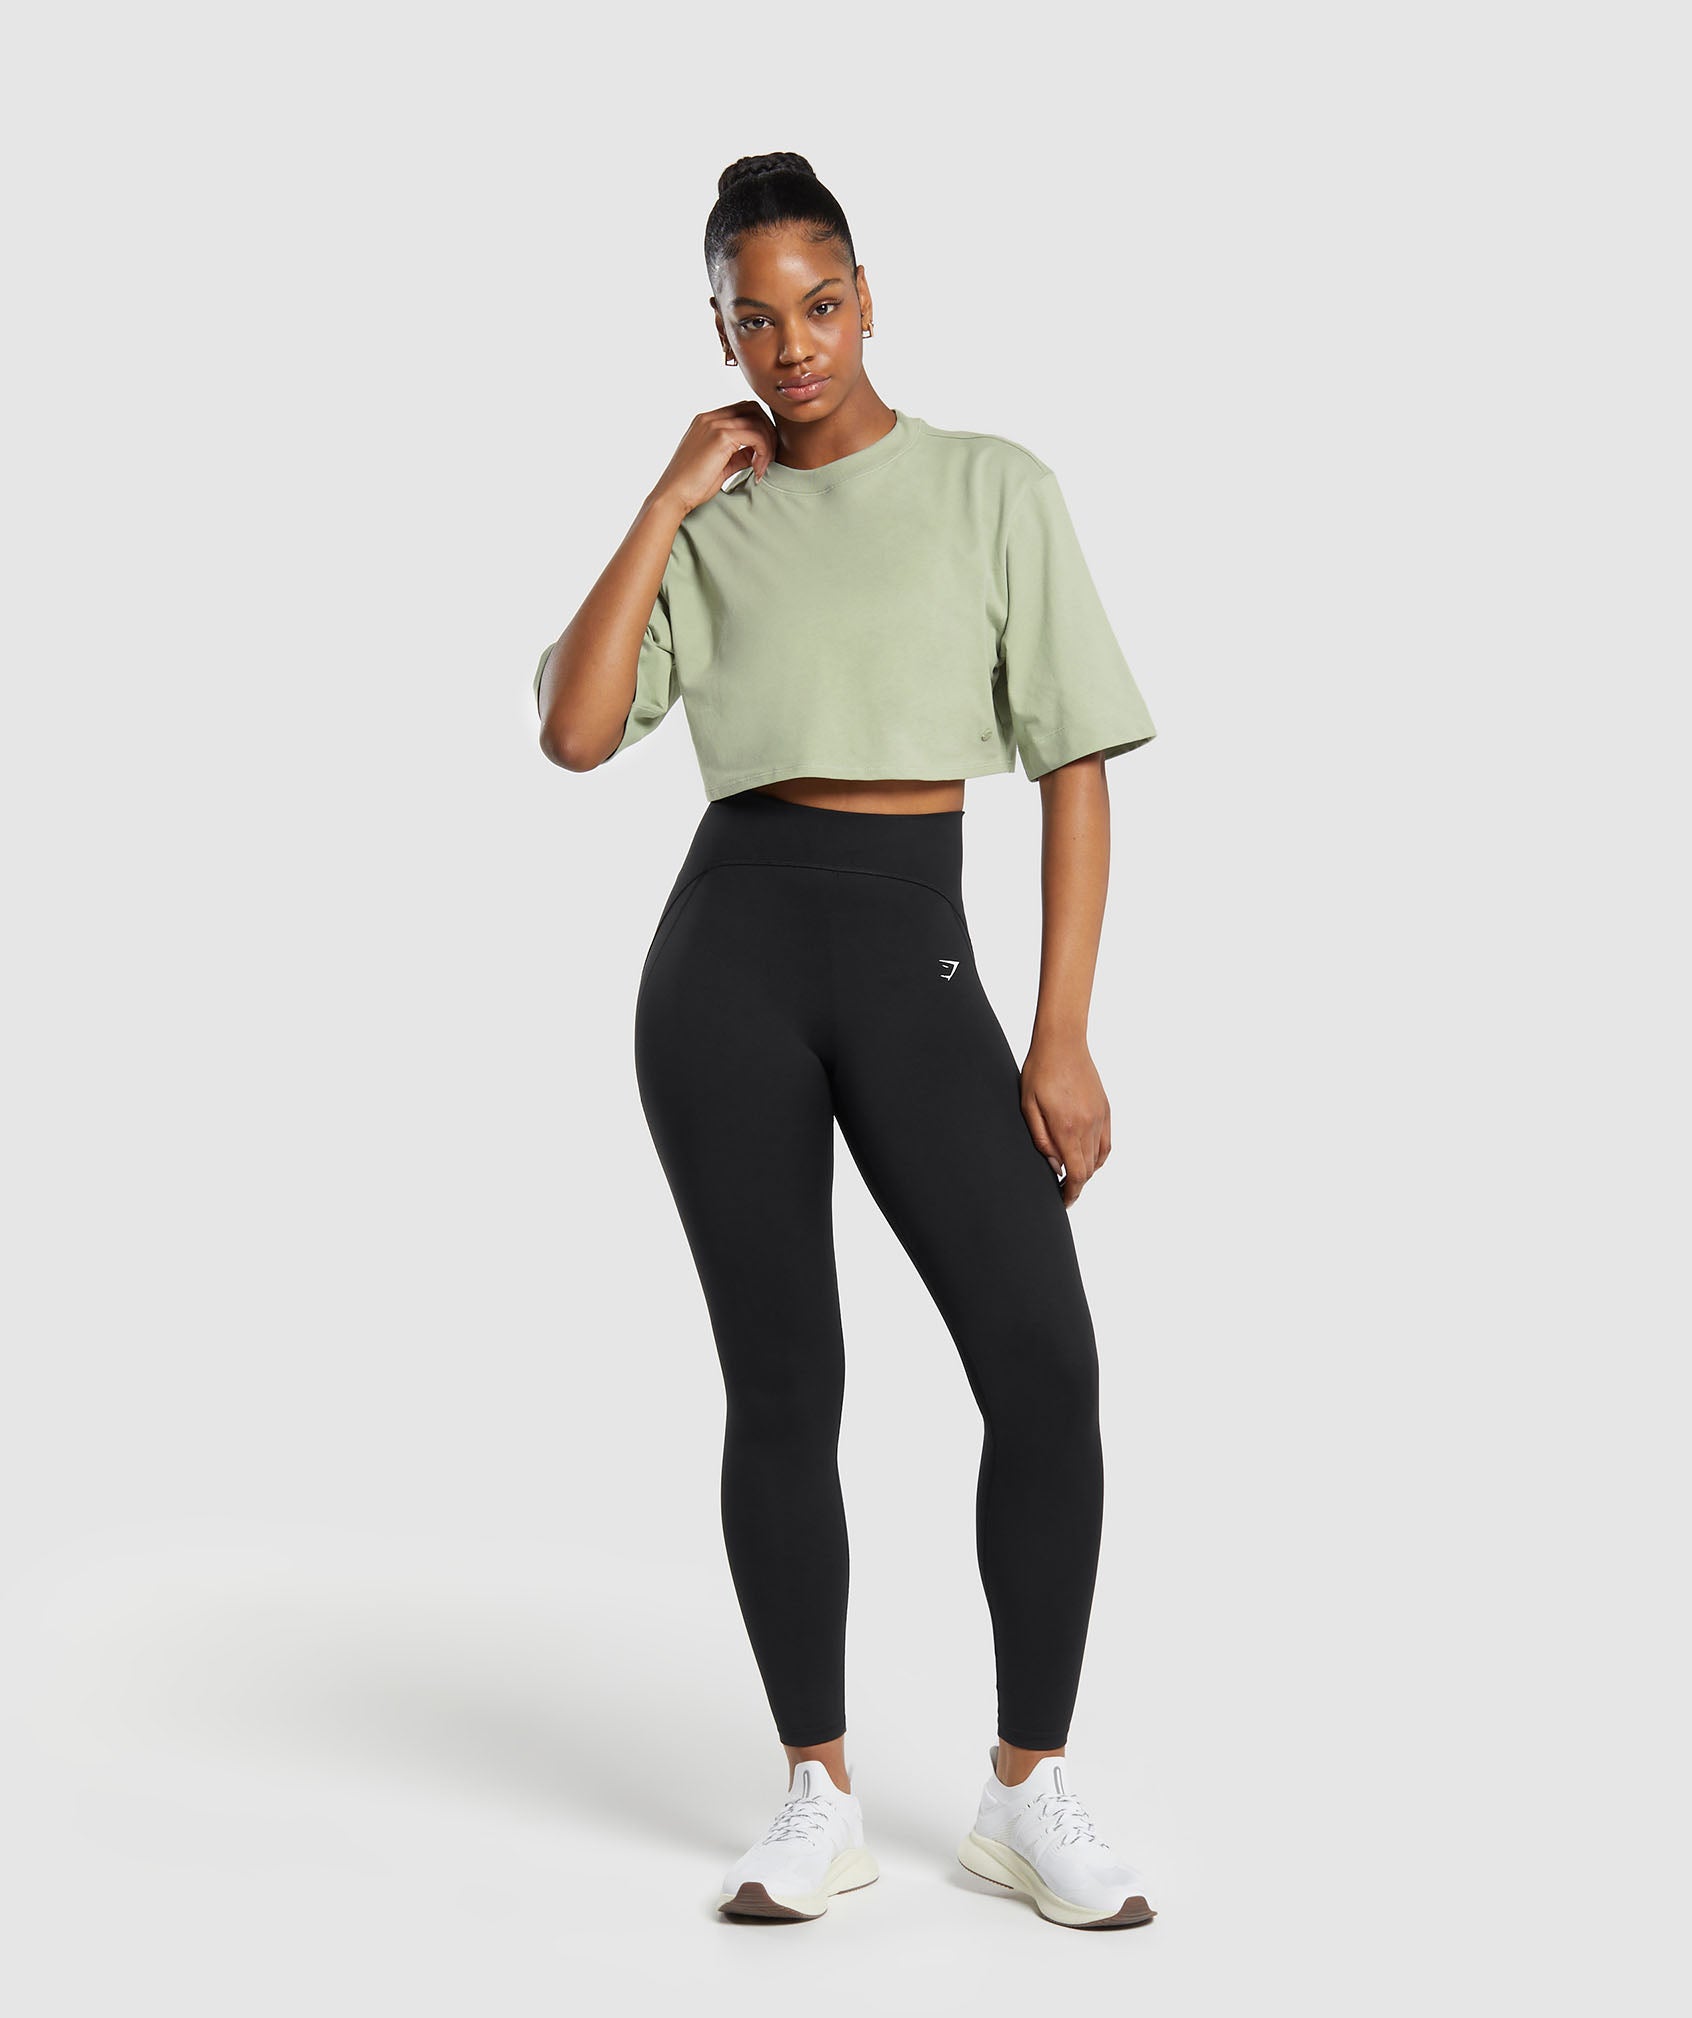 Cotton Boxy Crop Top in Faded Green - view 4